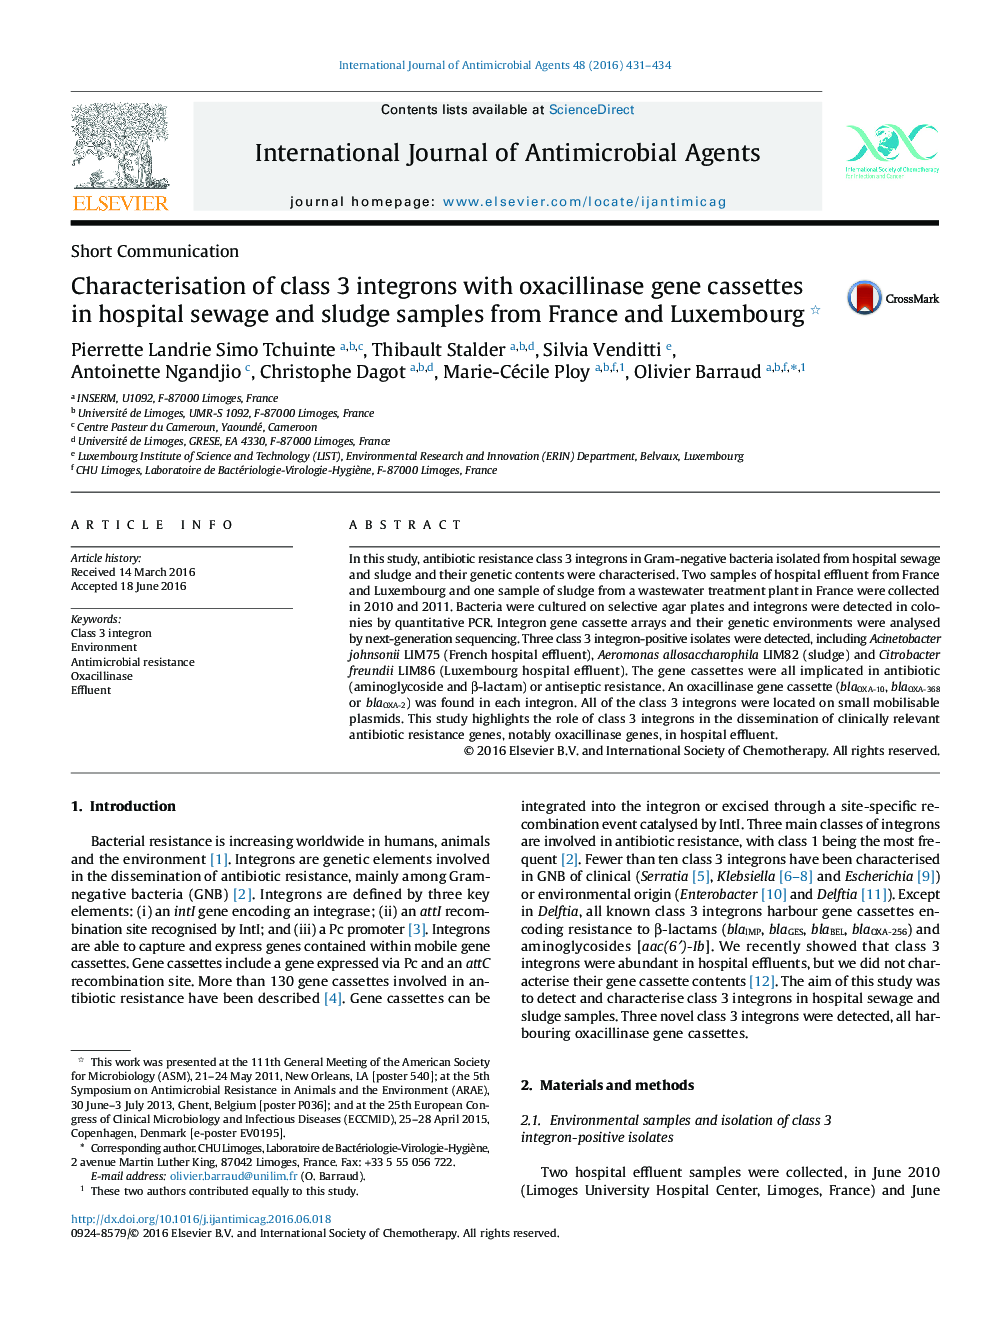 Characterisation of class 3 integrons with oxacillinase gene cassettes in hospital sewage and sludge samples from France and Luxembourg 